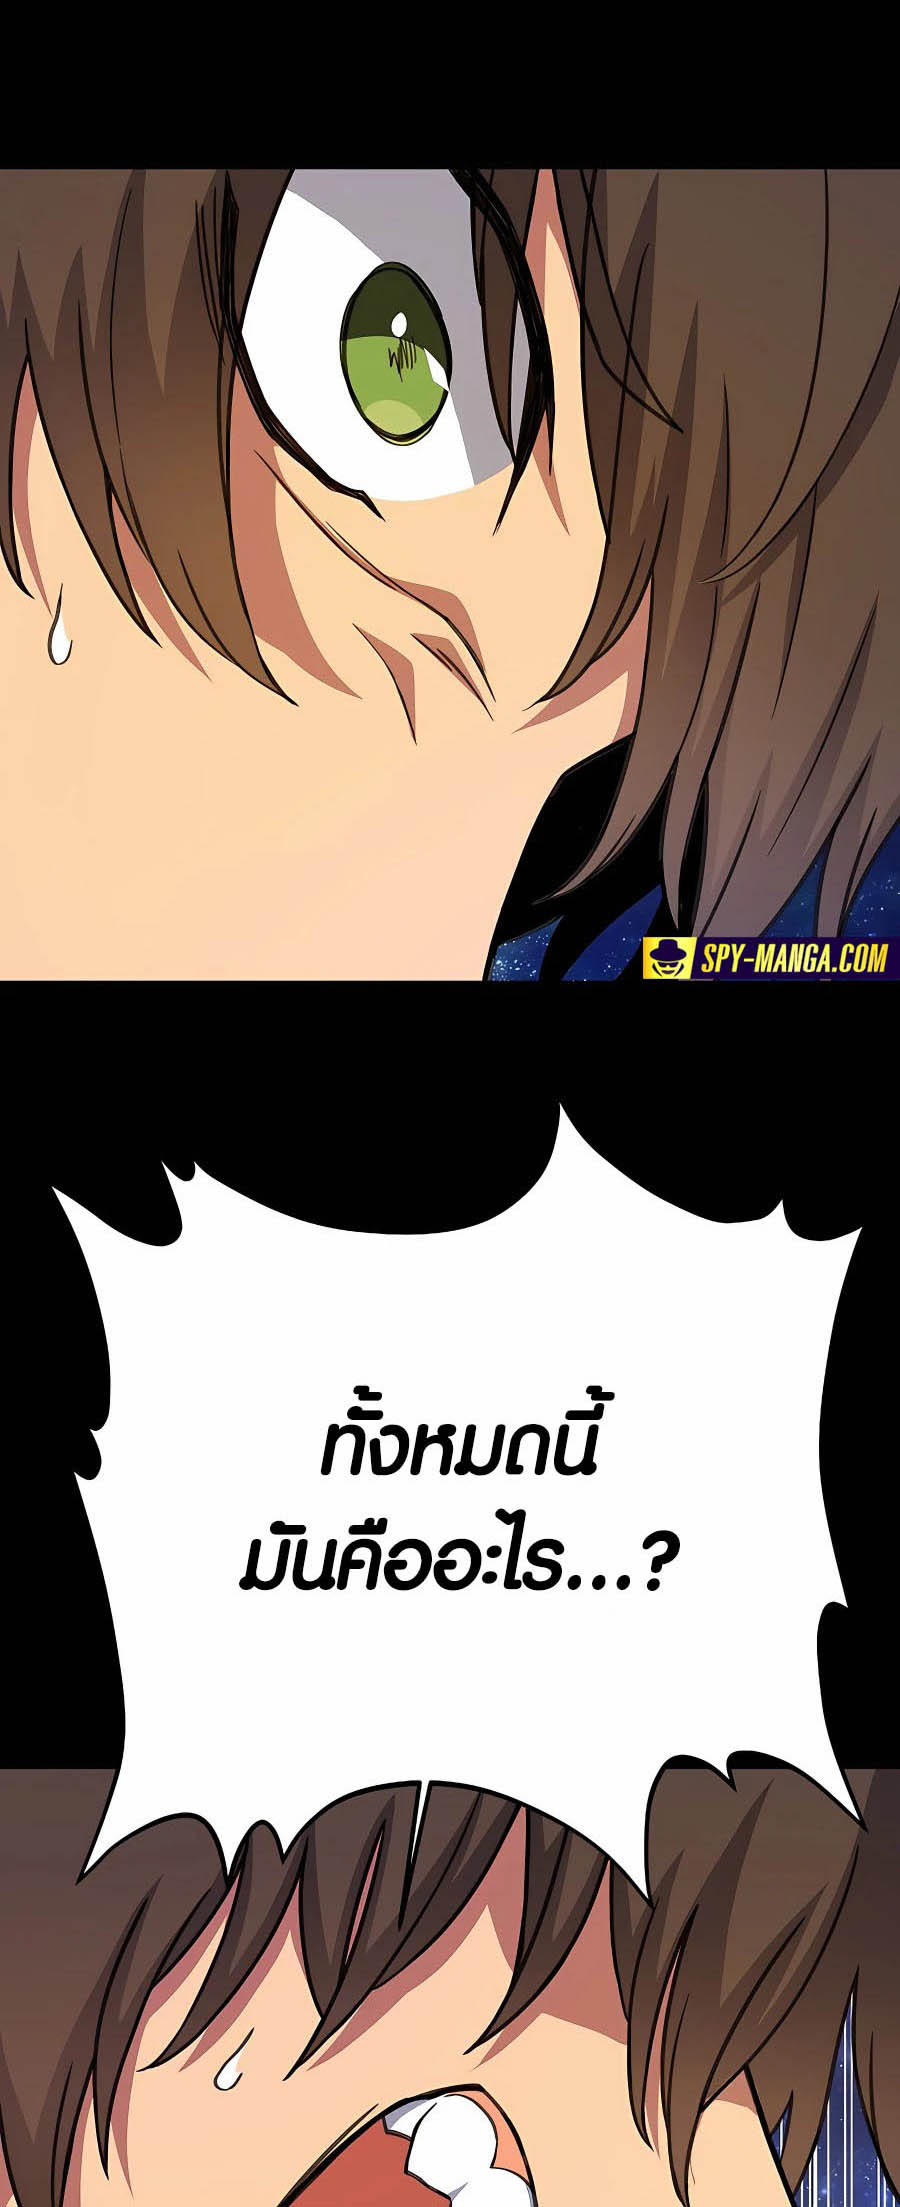 à¸­à¹ˆà¸²à¸™à¸¡à¸±à¸™à¸®à¸§à¸² à¹€à¸£à¸·à¹ˆà¸­à¸‡ The Part Time Land of the Gods 55 35